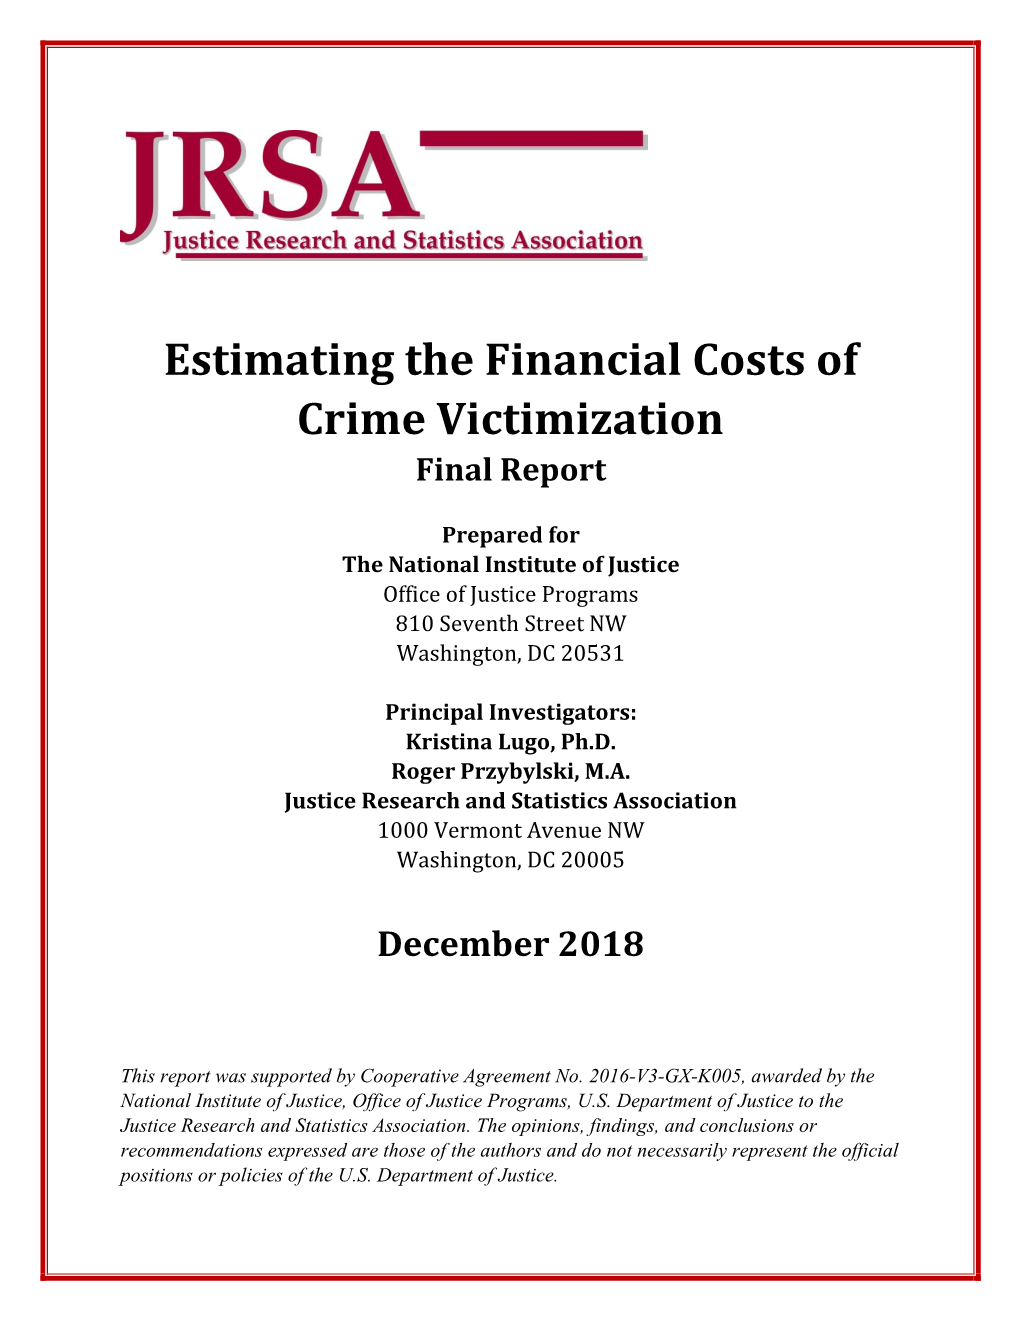 Estimating the Financial Costs of Crime Victimization Final Report